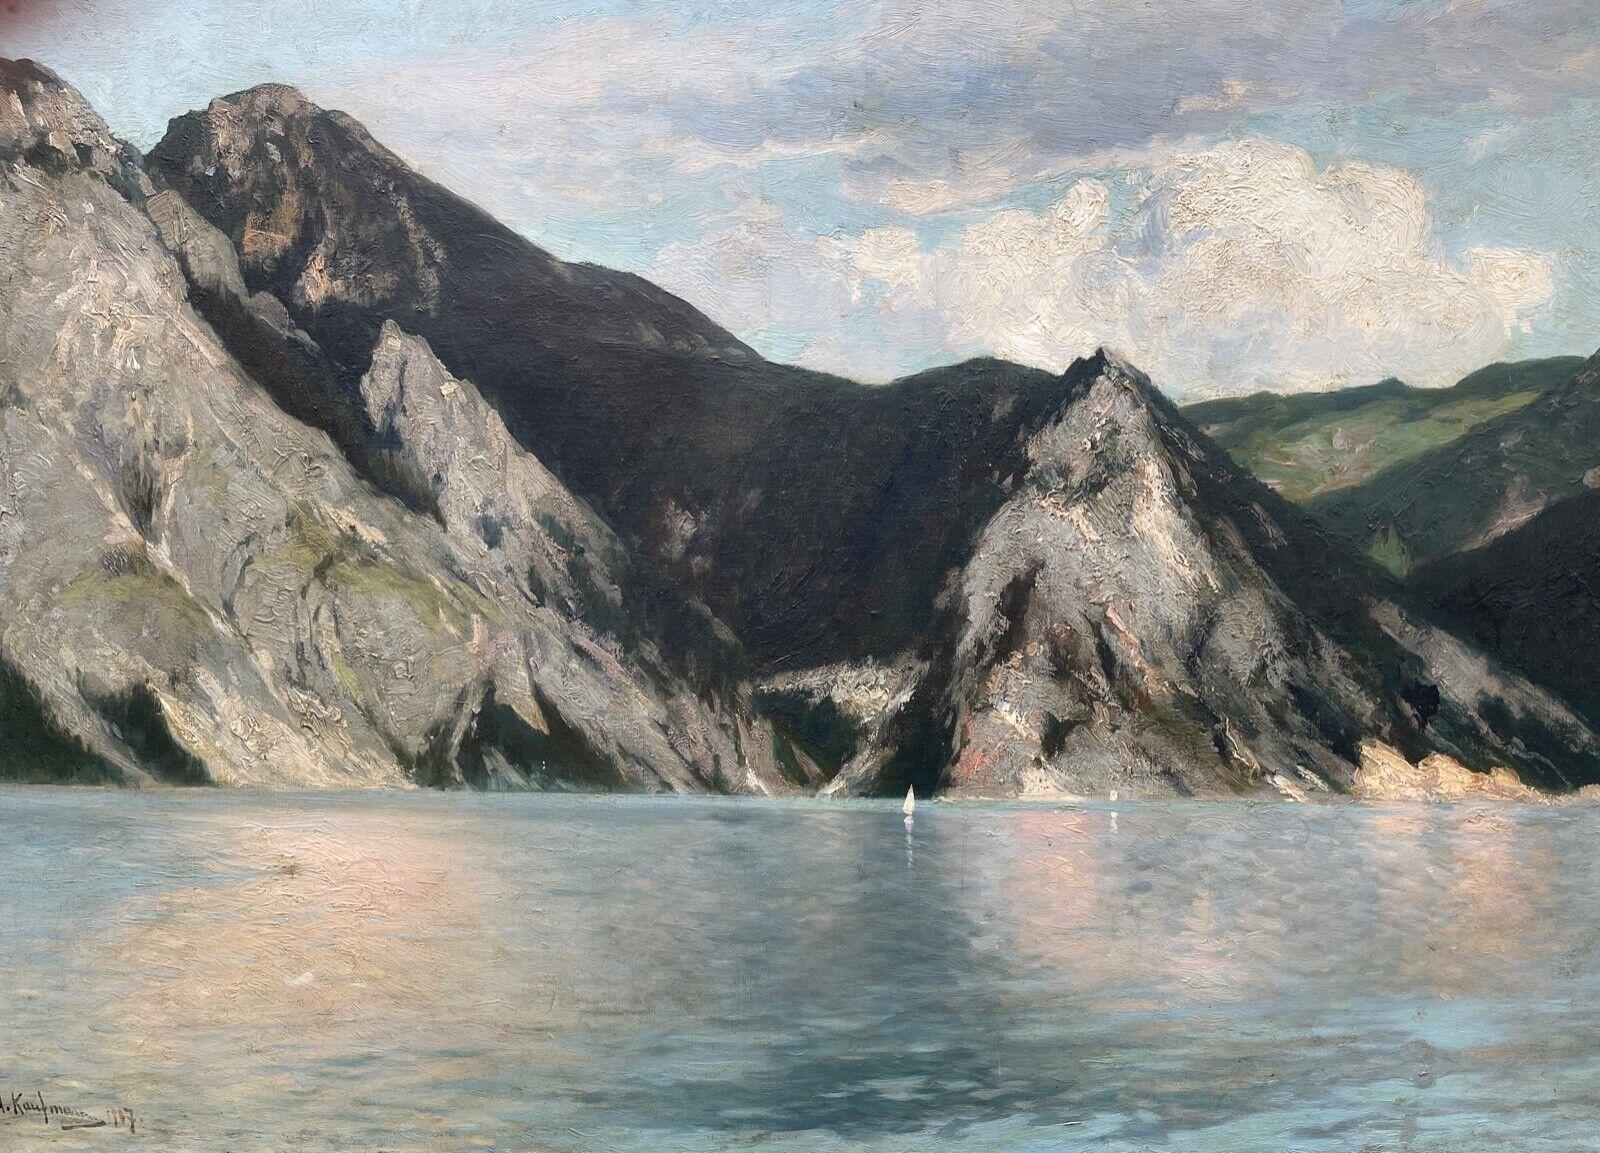 Oil painting on canvas, Landscape, mountain lake, made and signed by Adolf Kaufmann, 19th century
Bright painting made with skill, signed by Adolf Kaufmann (Austria 1848 - 1916), depicts a lake landscape surrounded by mountains.
Adolf Kaufmann (15